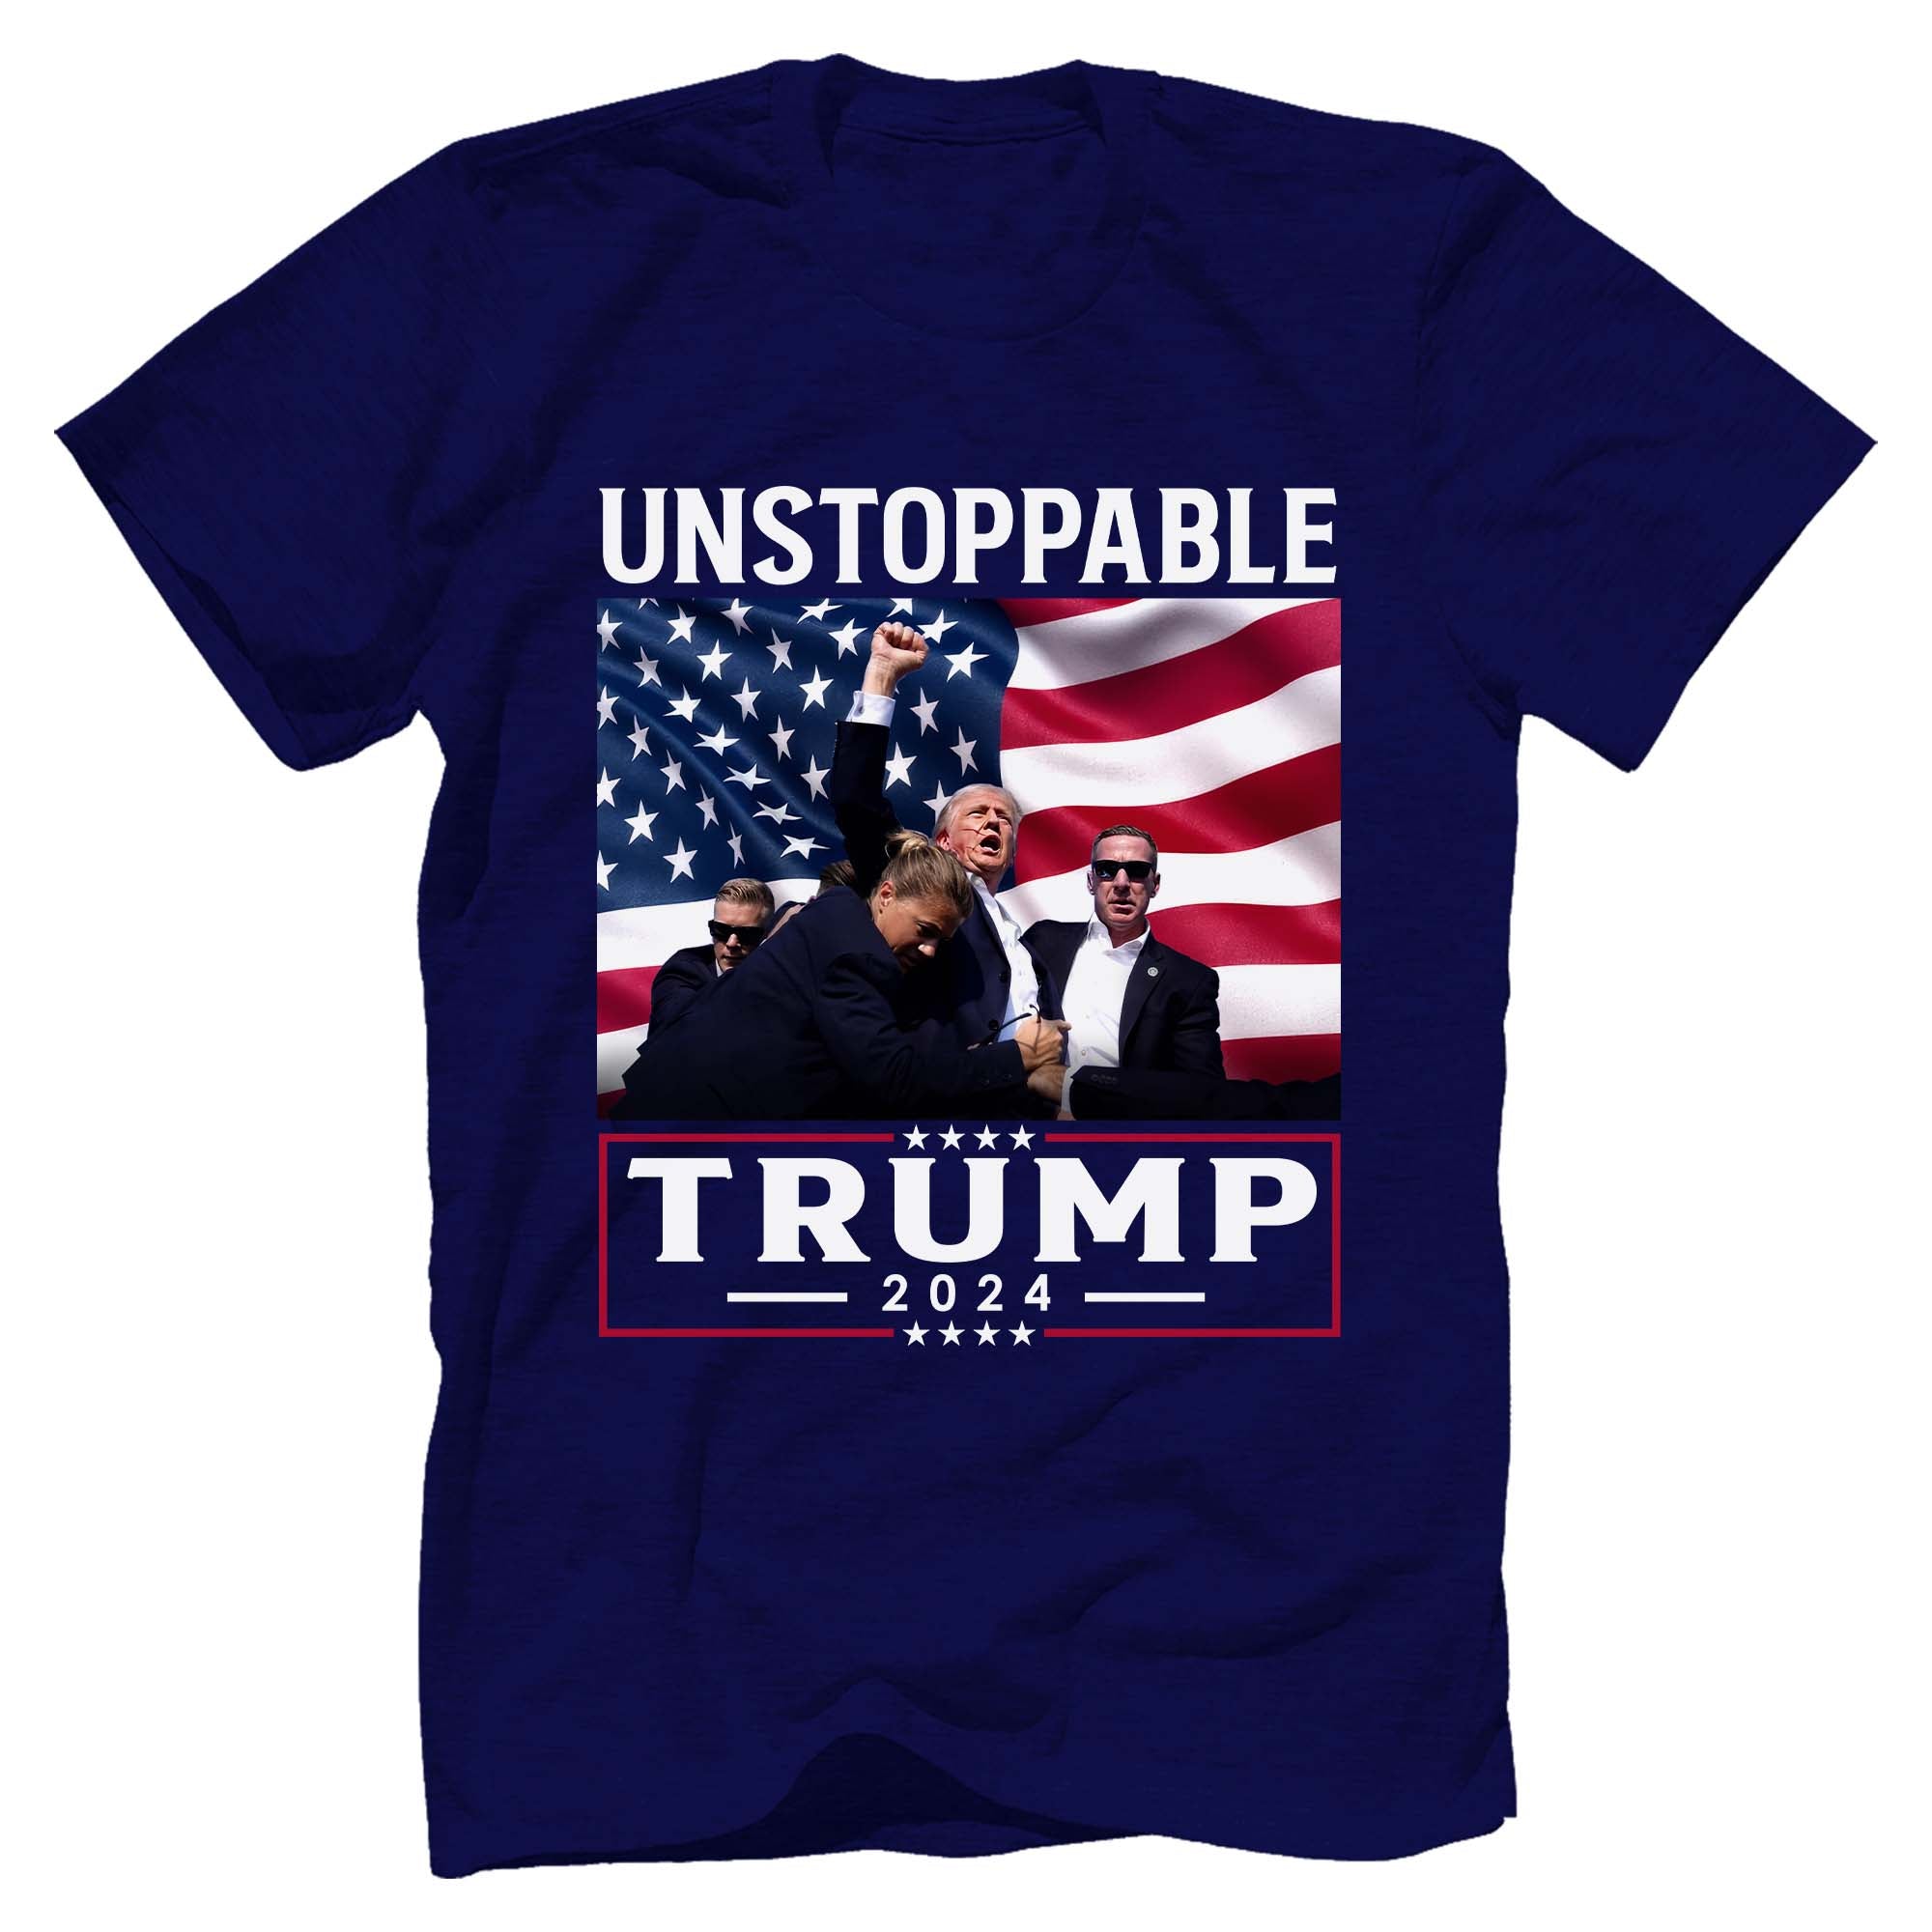 Unstoppable Our President Trump T-Shirt - GB94